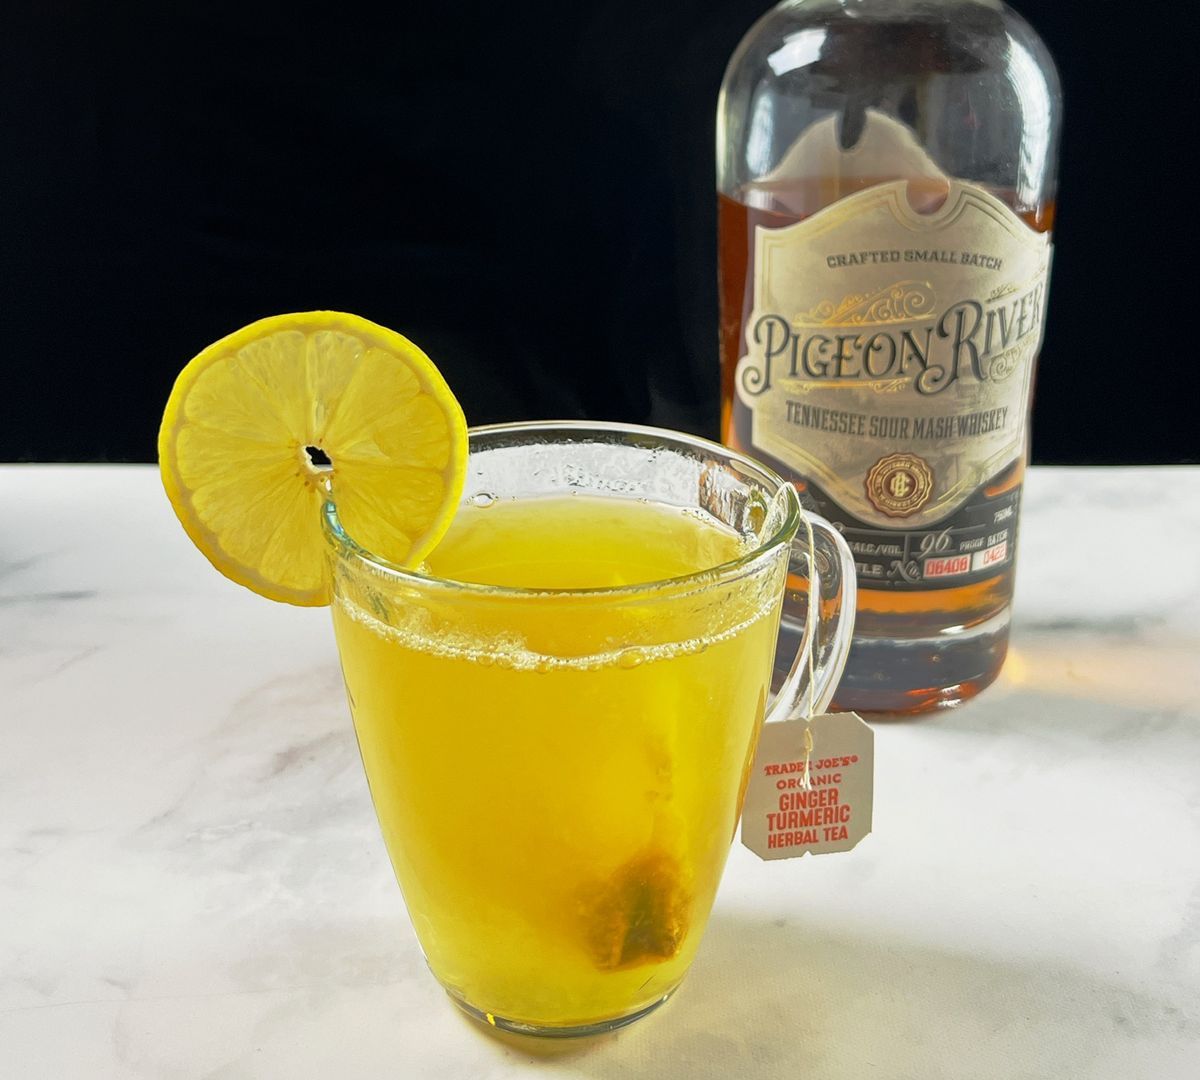 This is a hot toddy riff with a tropical twist, brining in passionfruit syrup and ginger/turmeric. Between the flavors and the bright yellow color, it will get you thinking of warmer days!